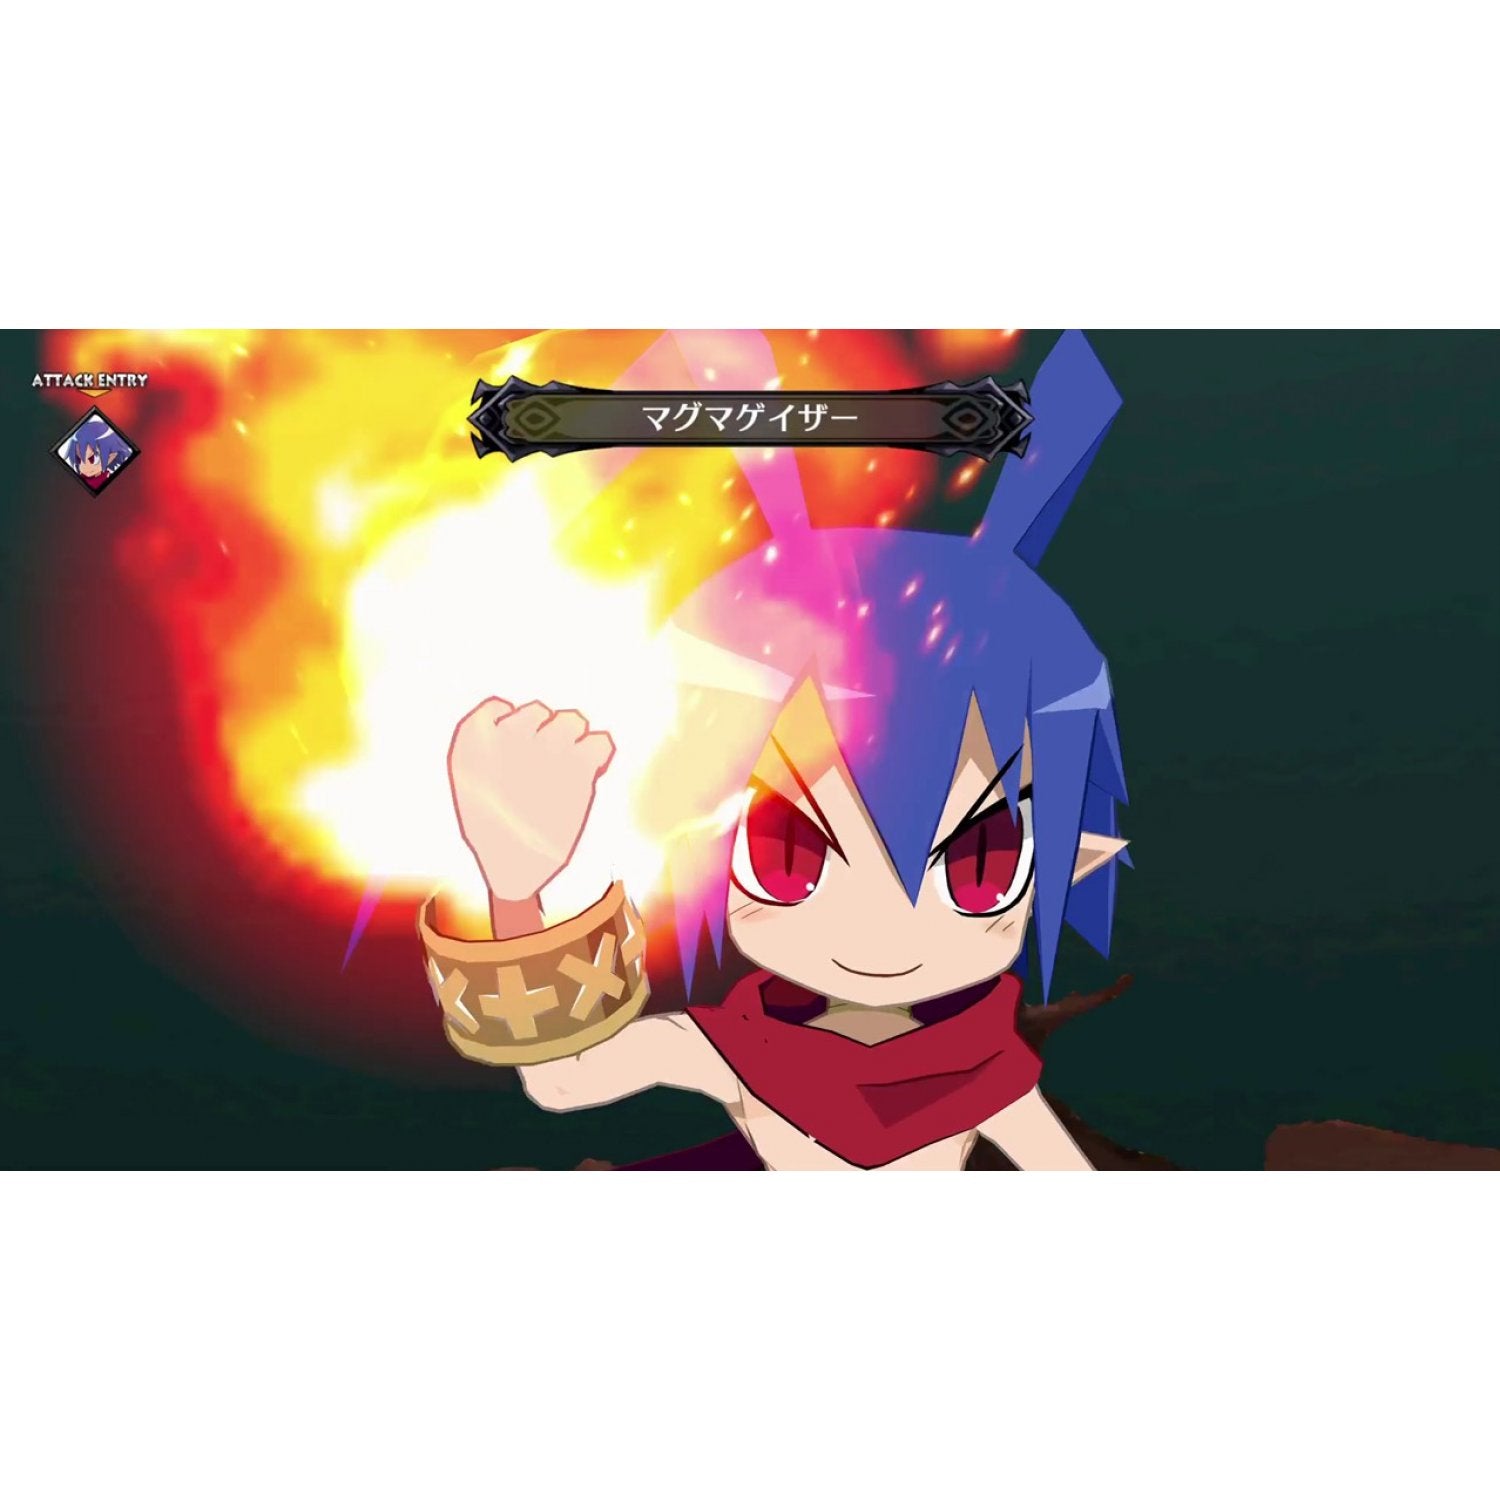 NSW Disgaea 6 (Chinese ver.)